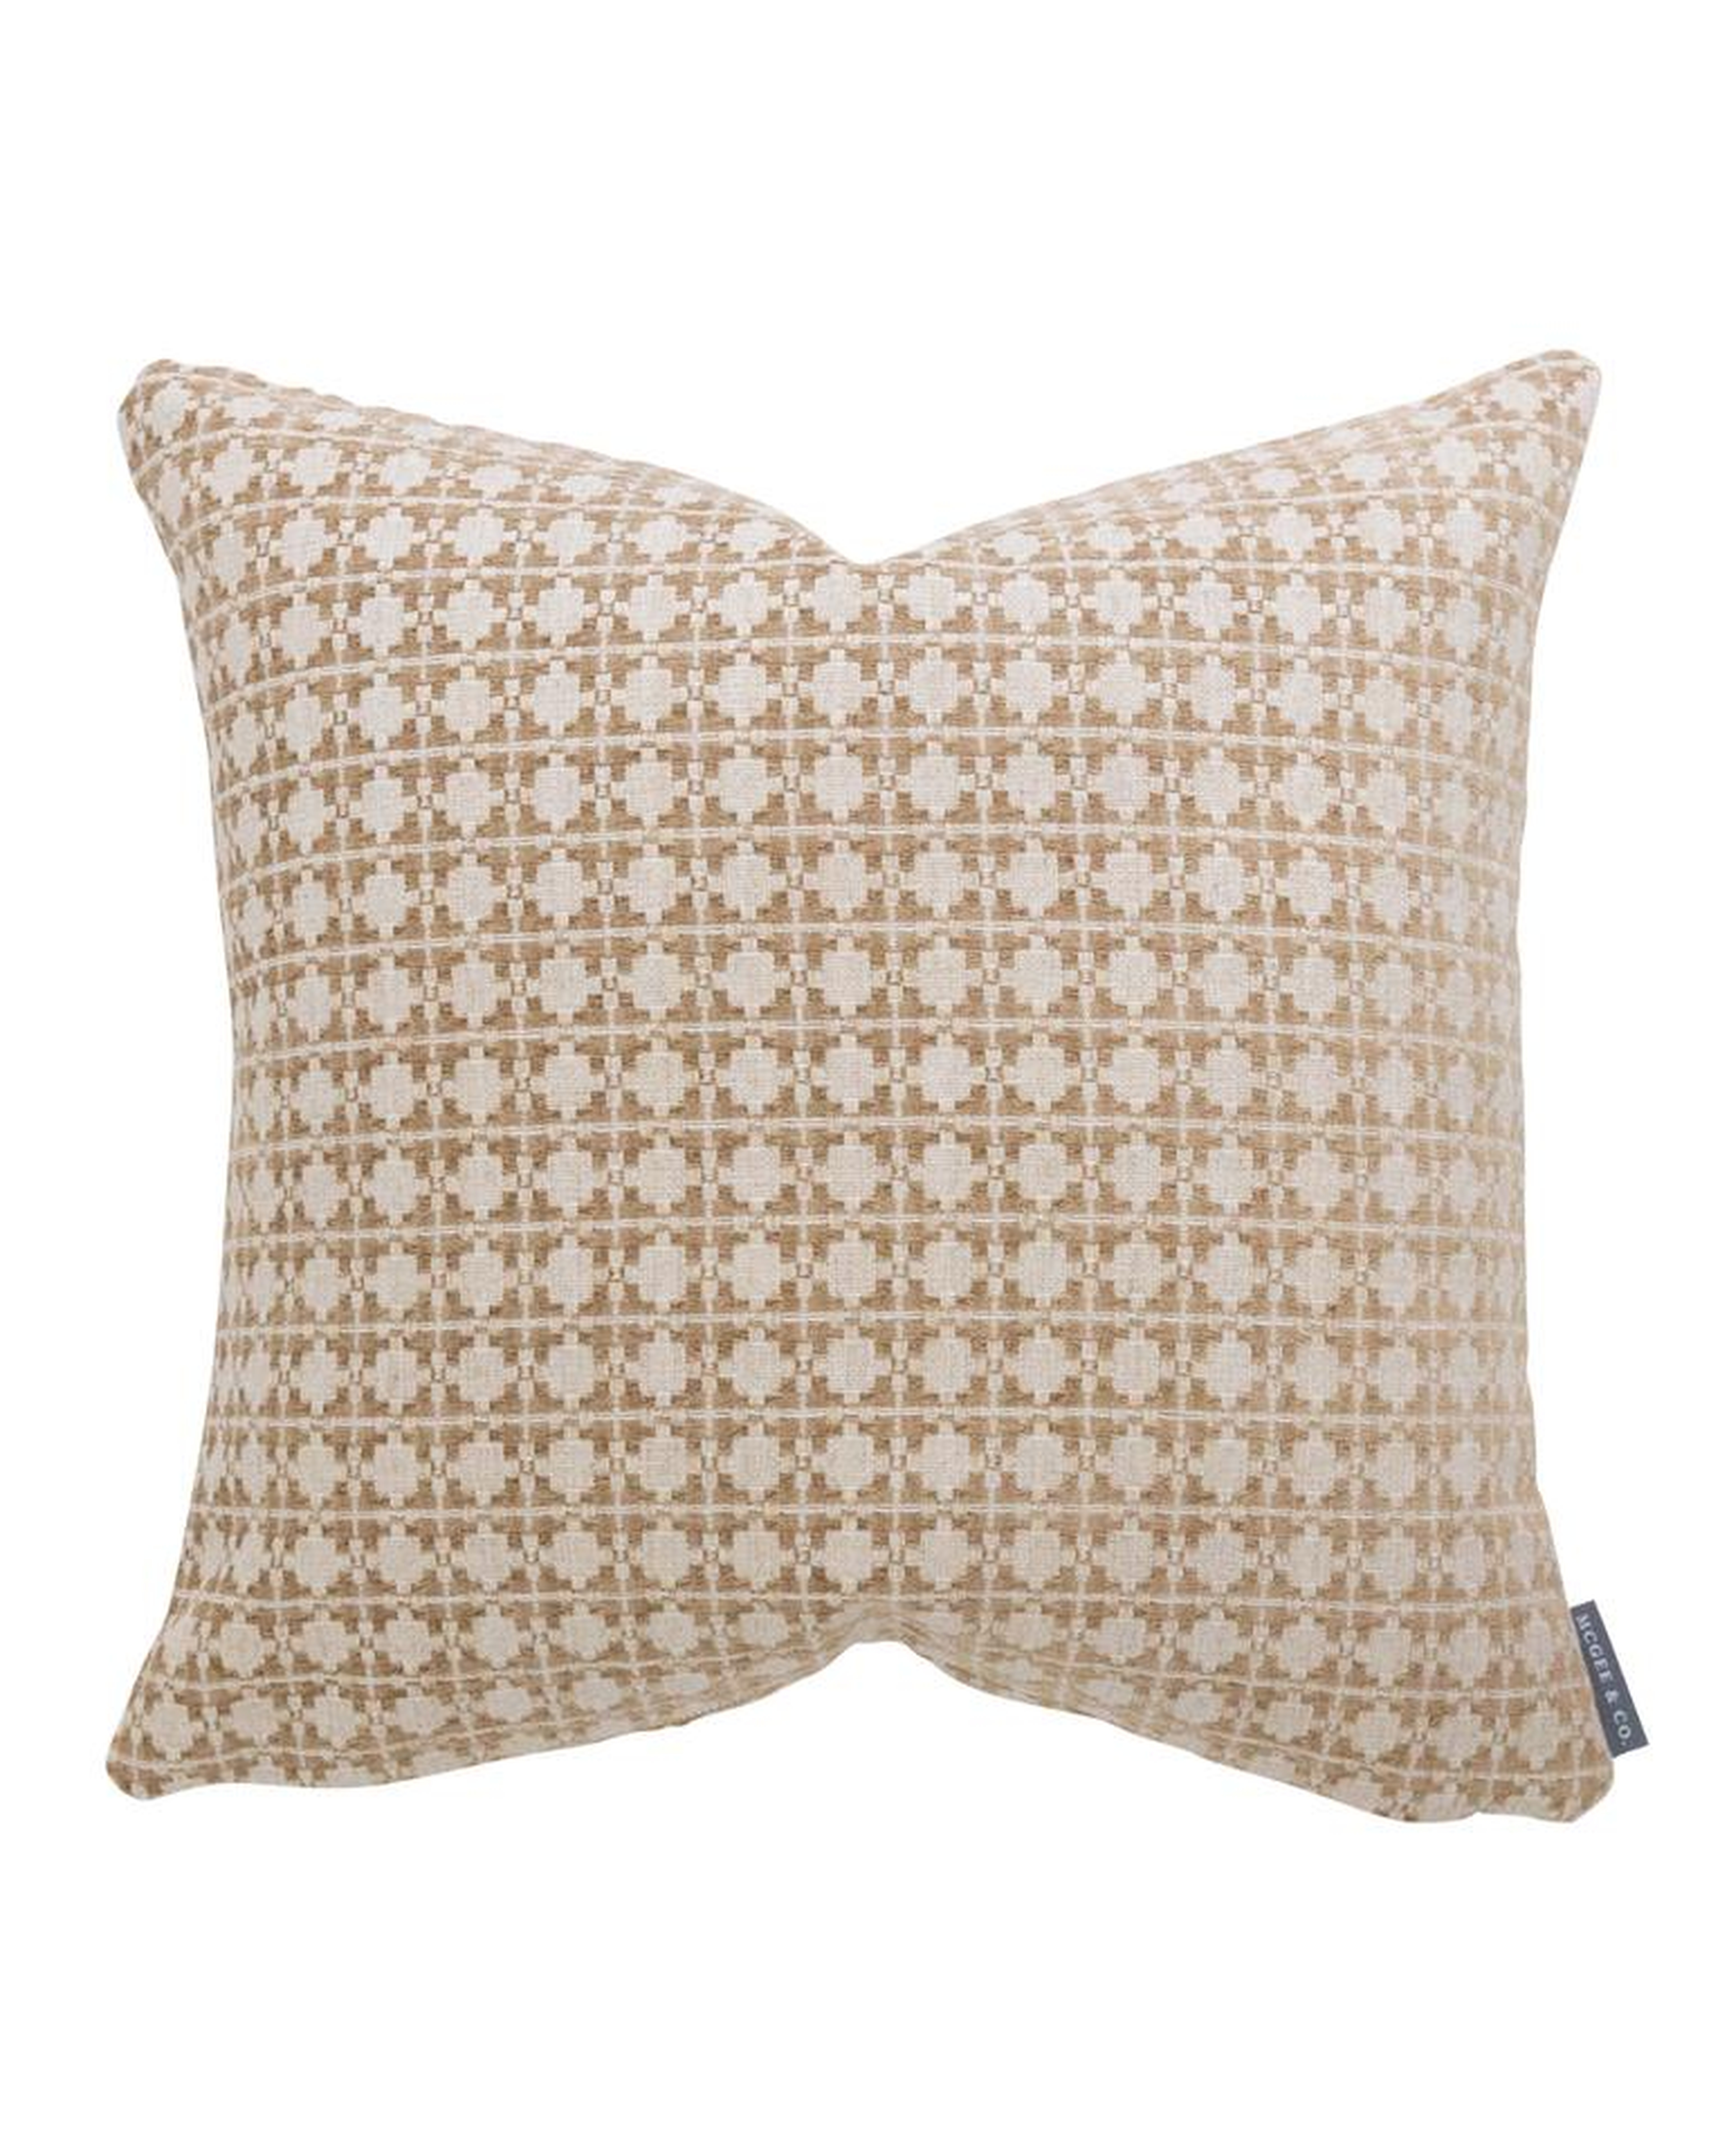 NEIL PILLOW COVER - McGee & Co.